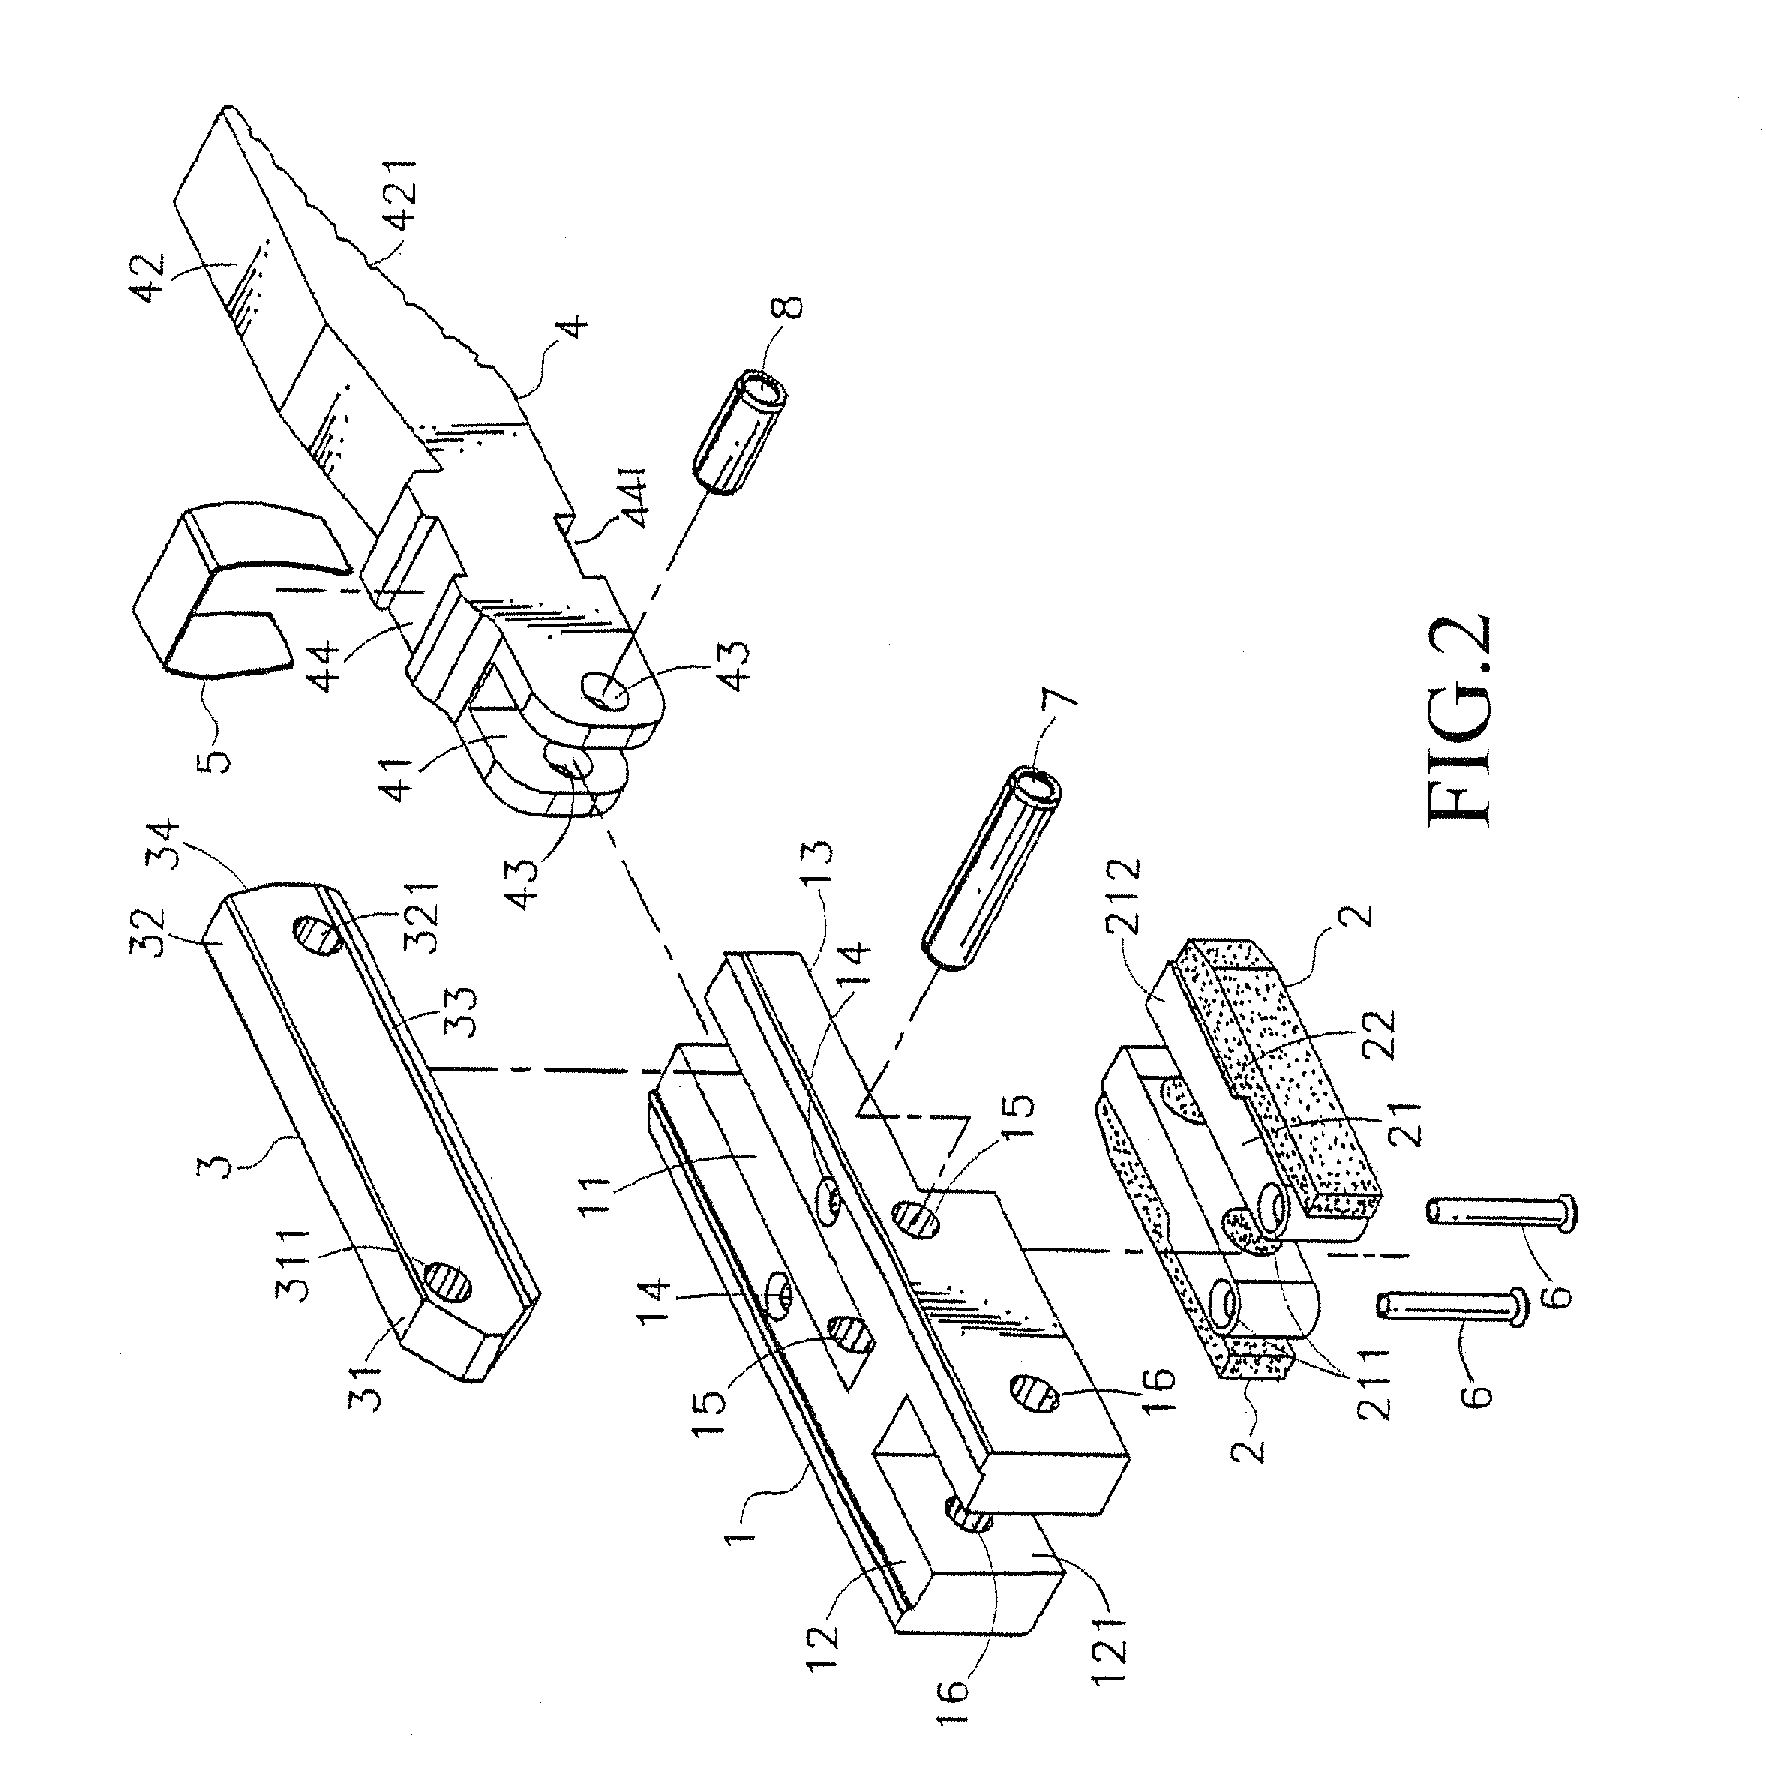 Structure of connector for aluminum extrusion frame